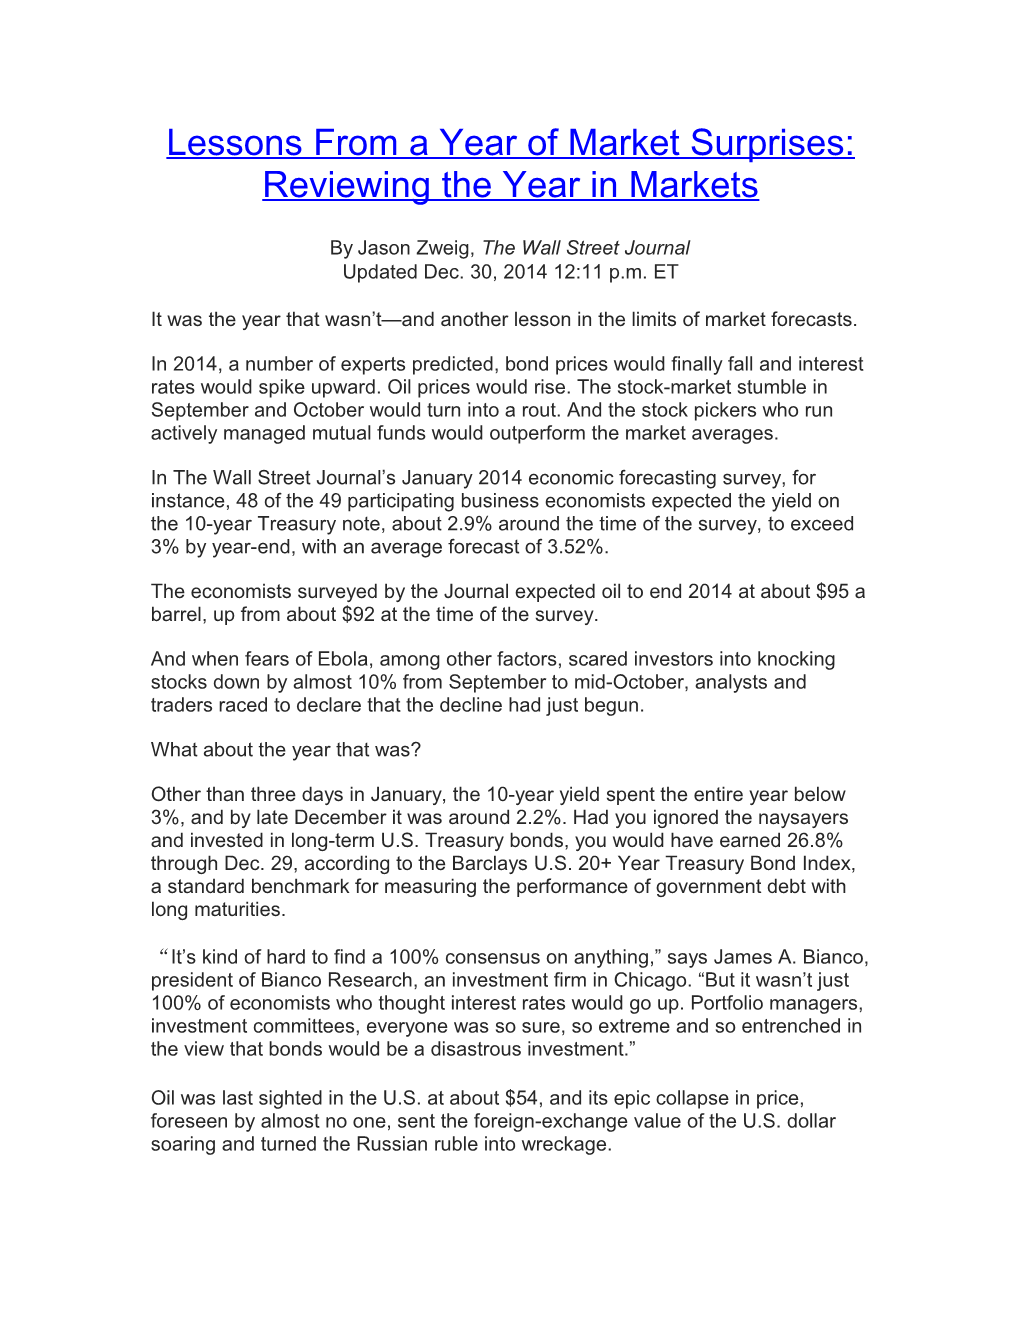 Lessons from a Year of Market Surprises: Reviewing the Year in Markets